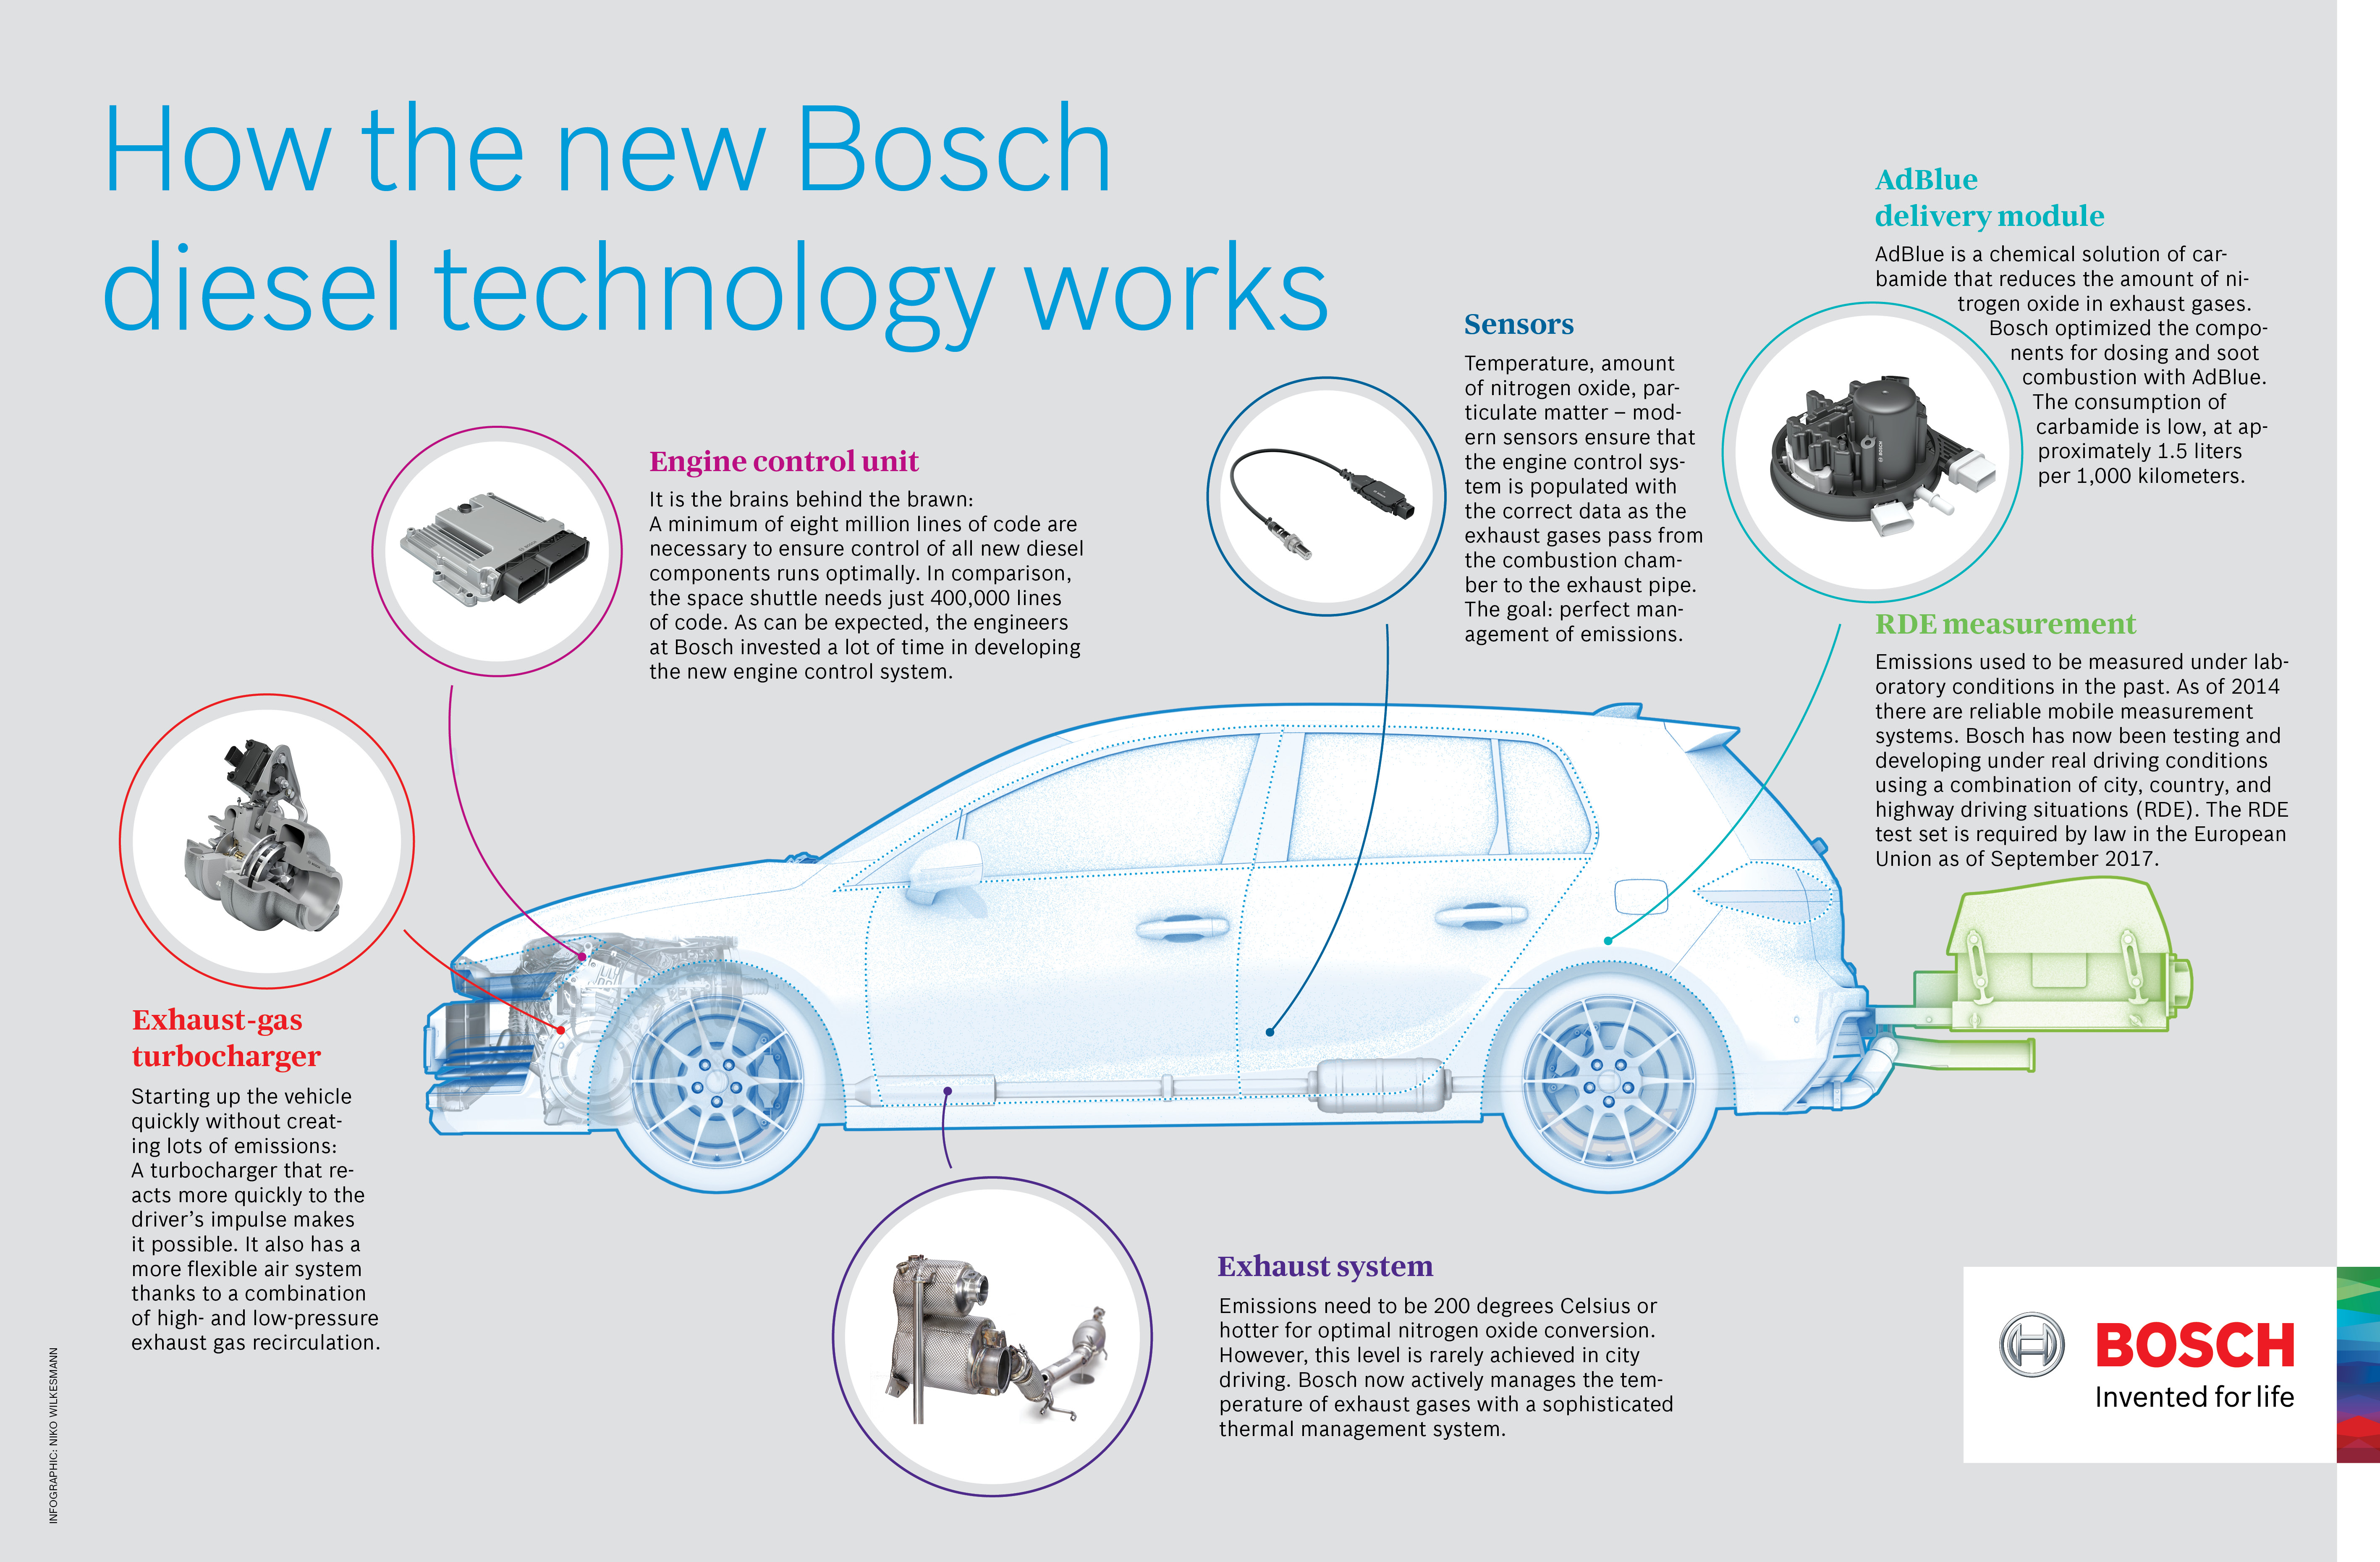 How the new Bosch diesel technology works